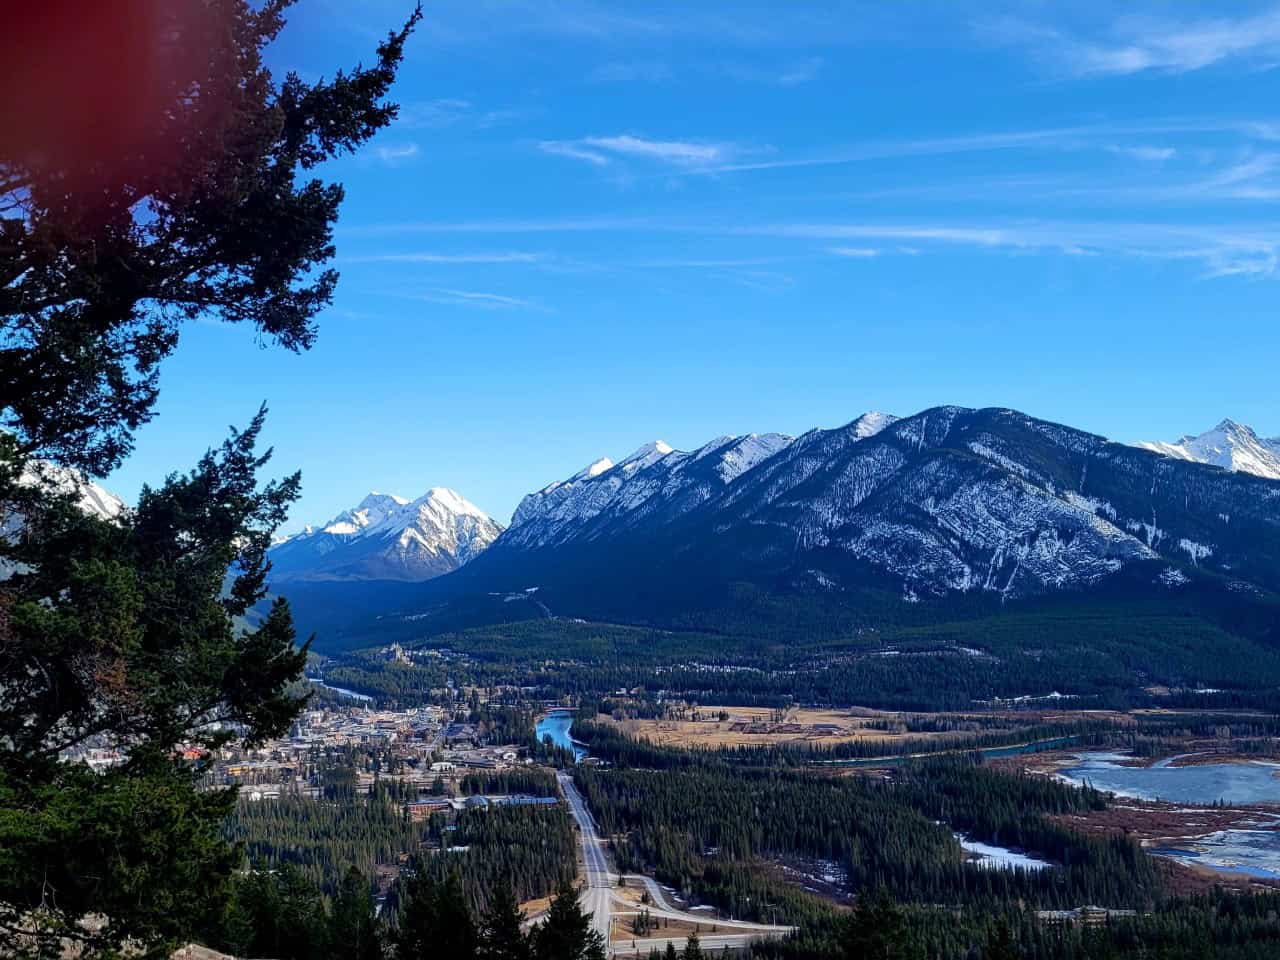 View from Mt. Norquay Lookout - Banff Alberta Canada - The spectacular view from the Mount Norquay Scenic Lookout Point of the Banff townsite.
A fun drive on a winding road where wildlife is abundant.
Banff, Alberta, Canada